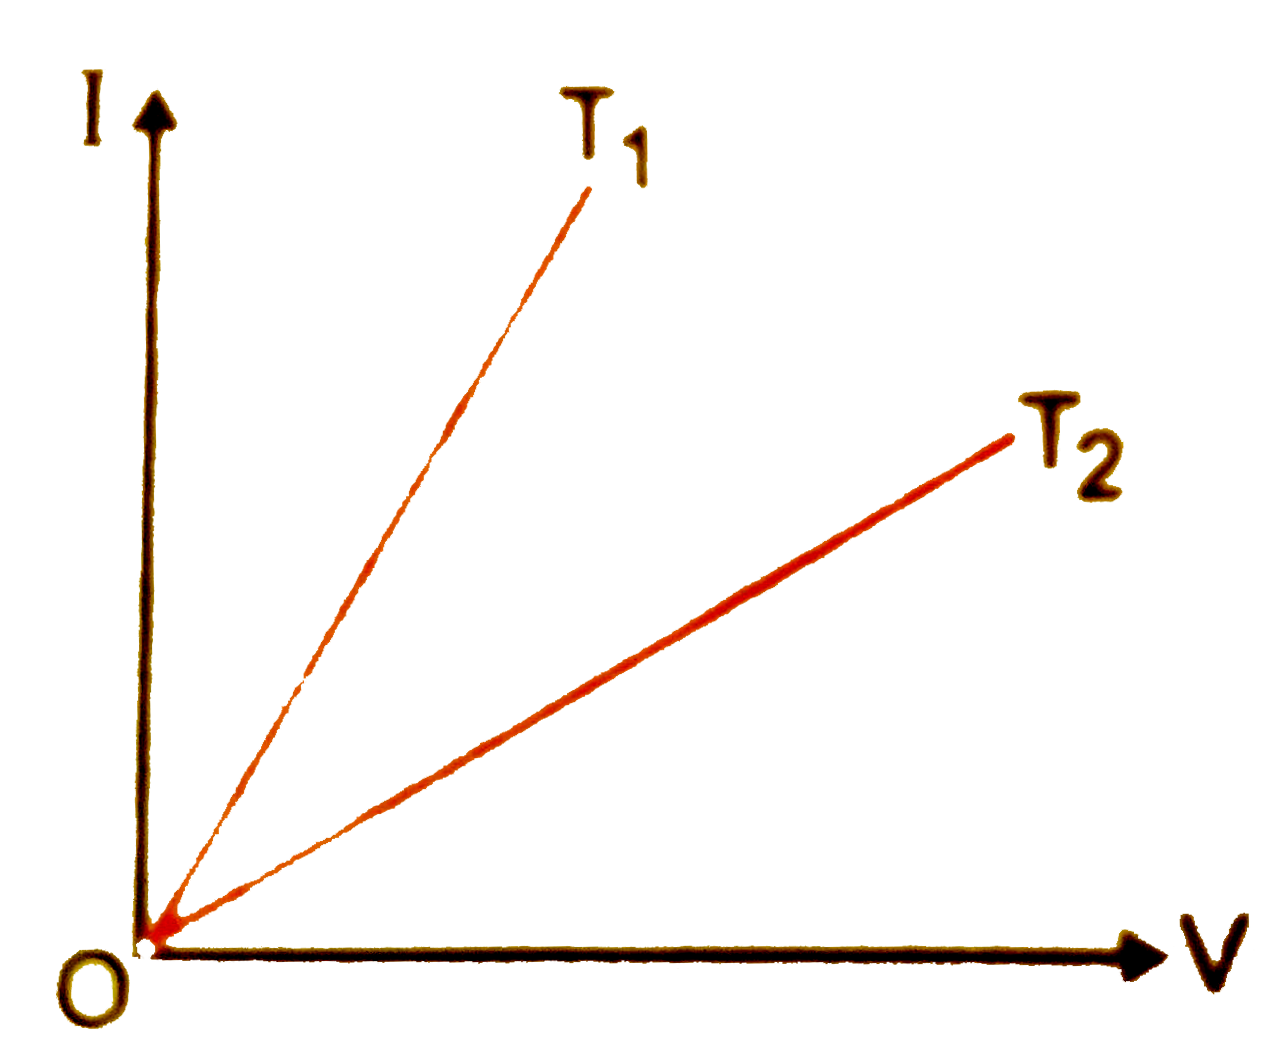 V- I graph for a metallic wire at two different temperature T(1) and T(2) is shown in figure. Which of the two temperature is higher and why?